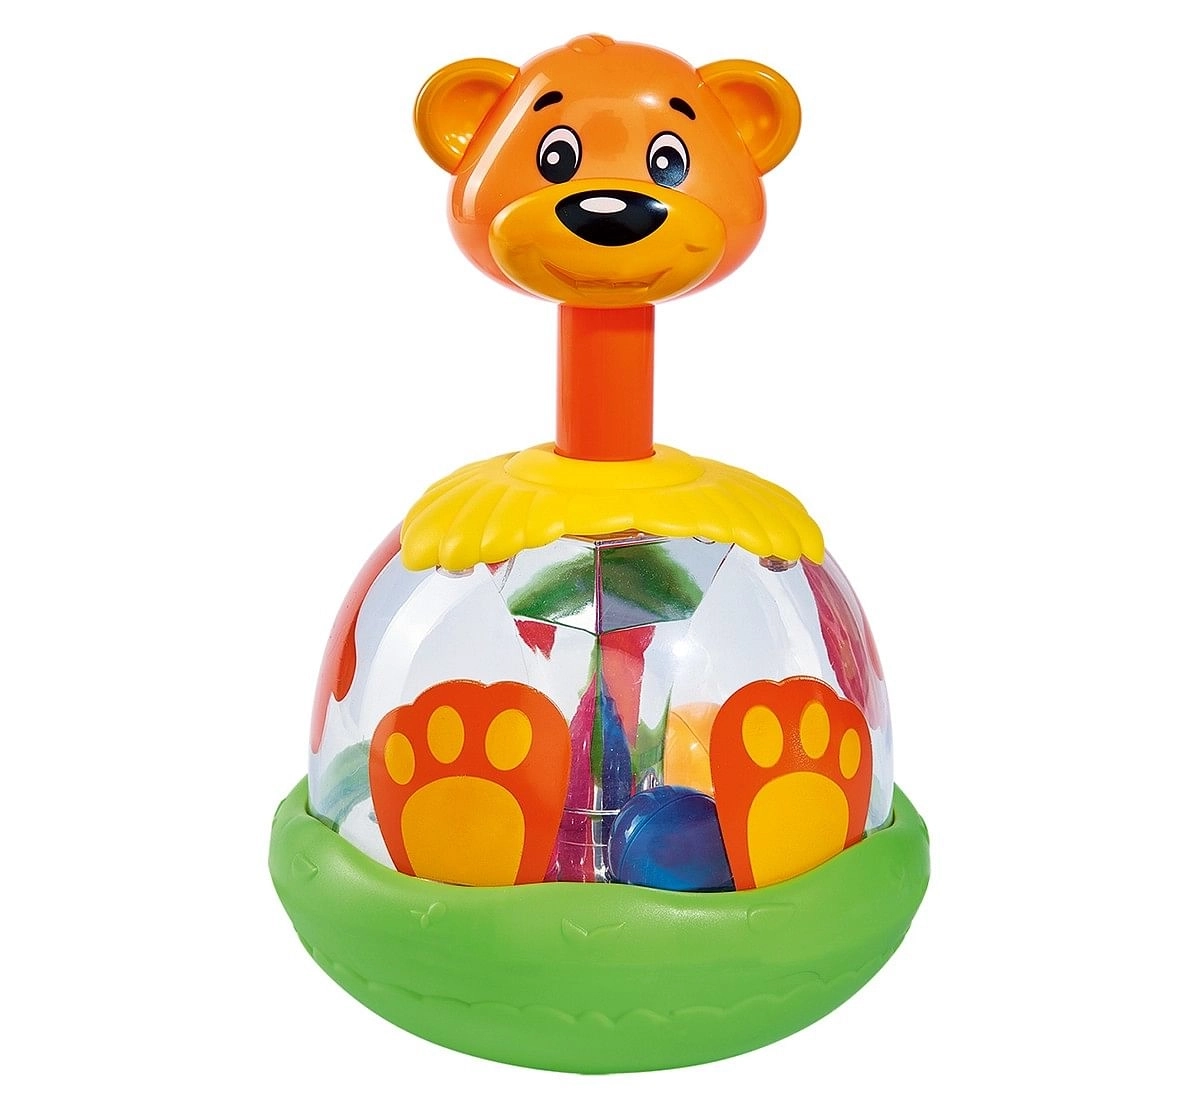 Simba Abc Funny Bear Spinning Top,  6M+ (Multicolor)